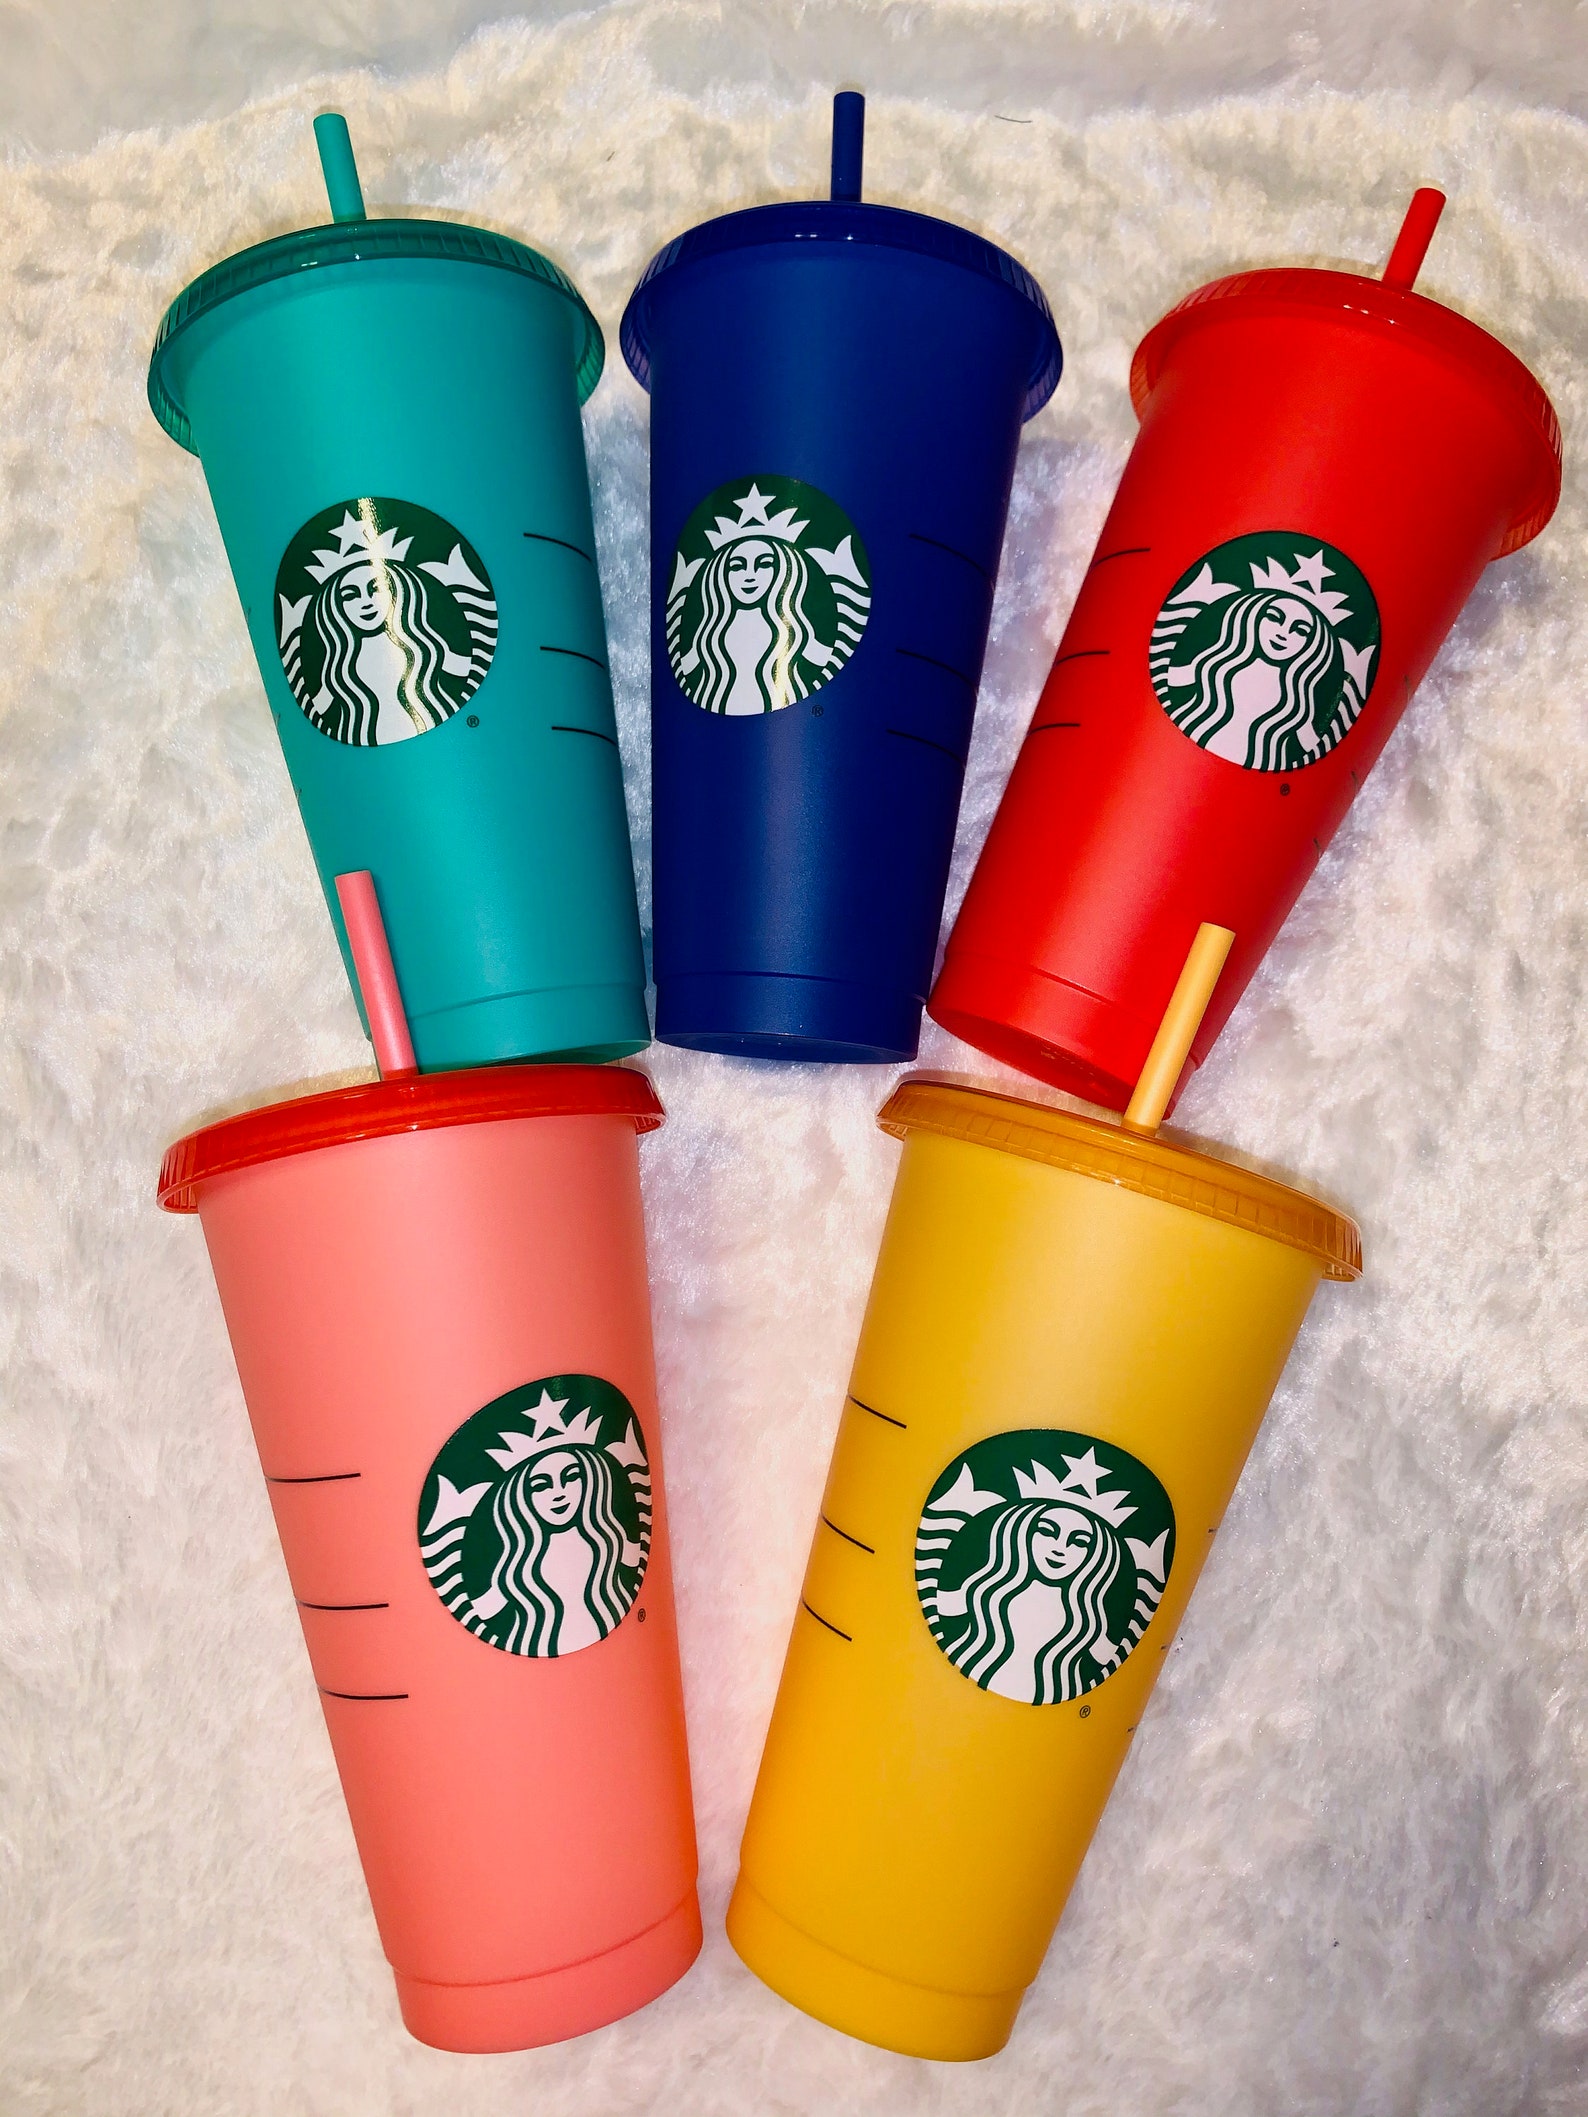 Personalized color changing Starbucks cups summer 2020 | Etsy